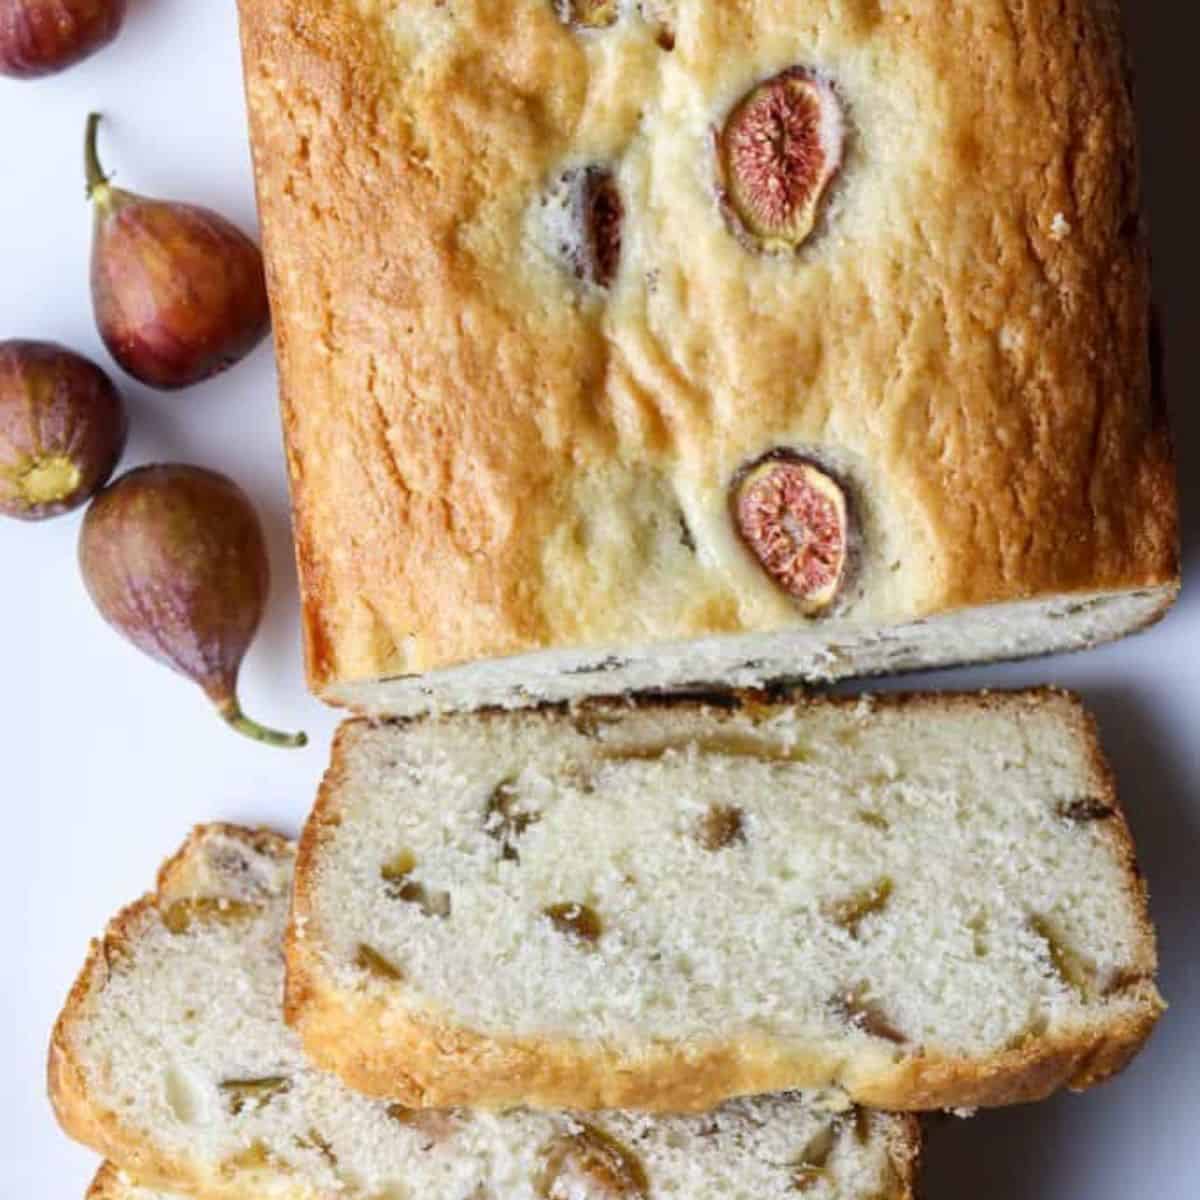 A loaf of fruit bread and figs.